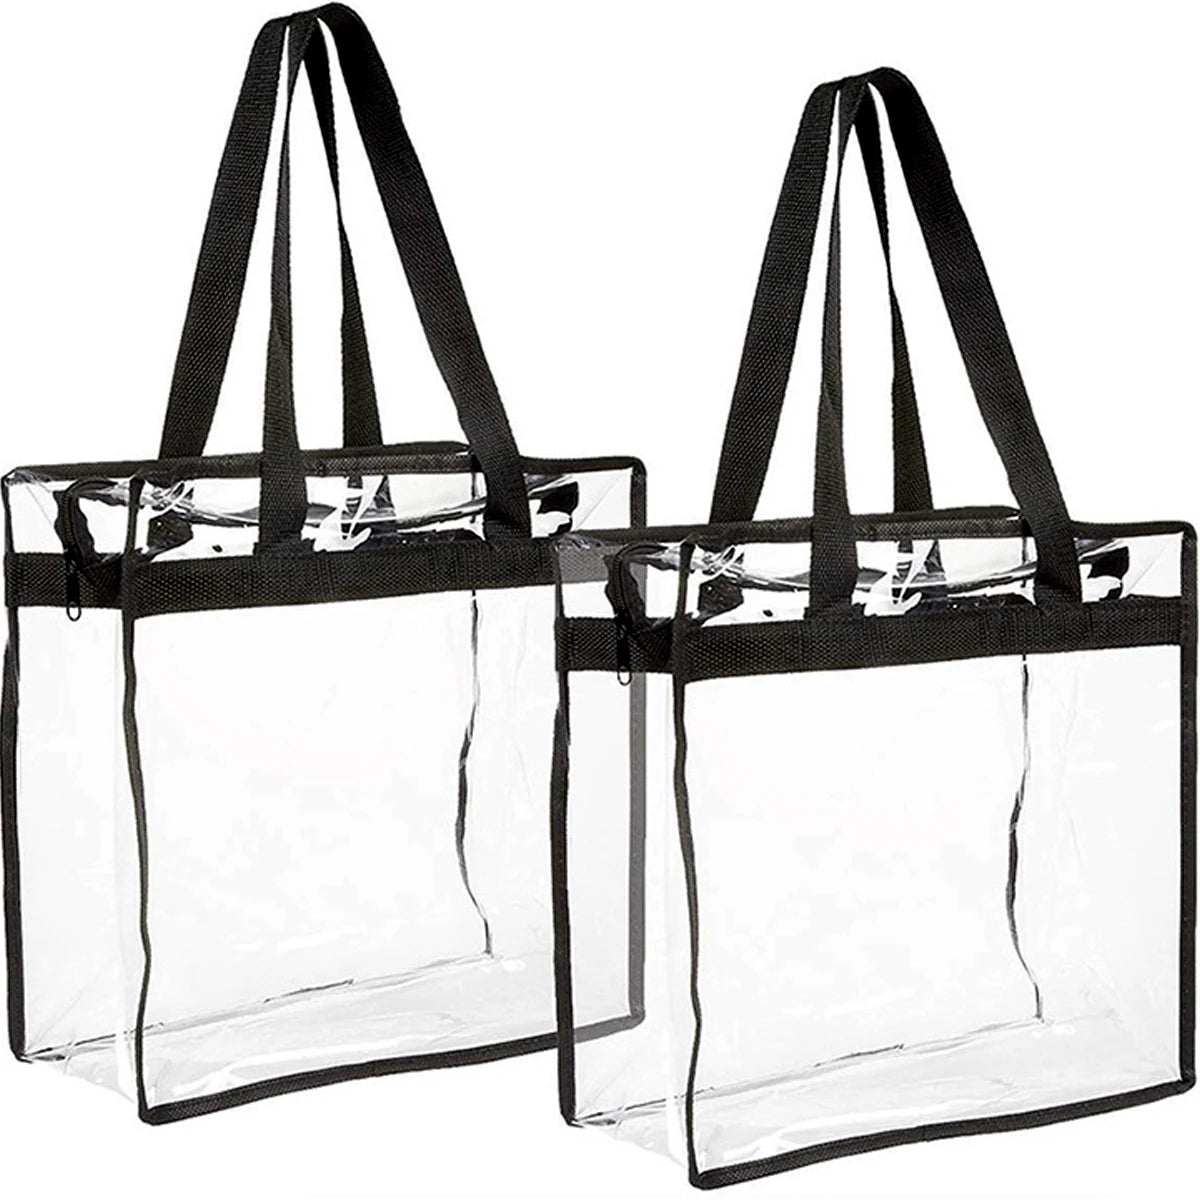 Clear Vinyl Tote Bags With Zipper Closure, 2-pack